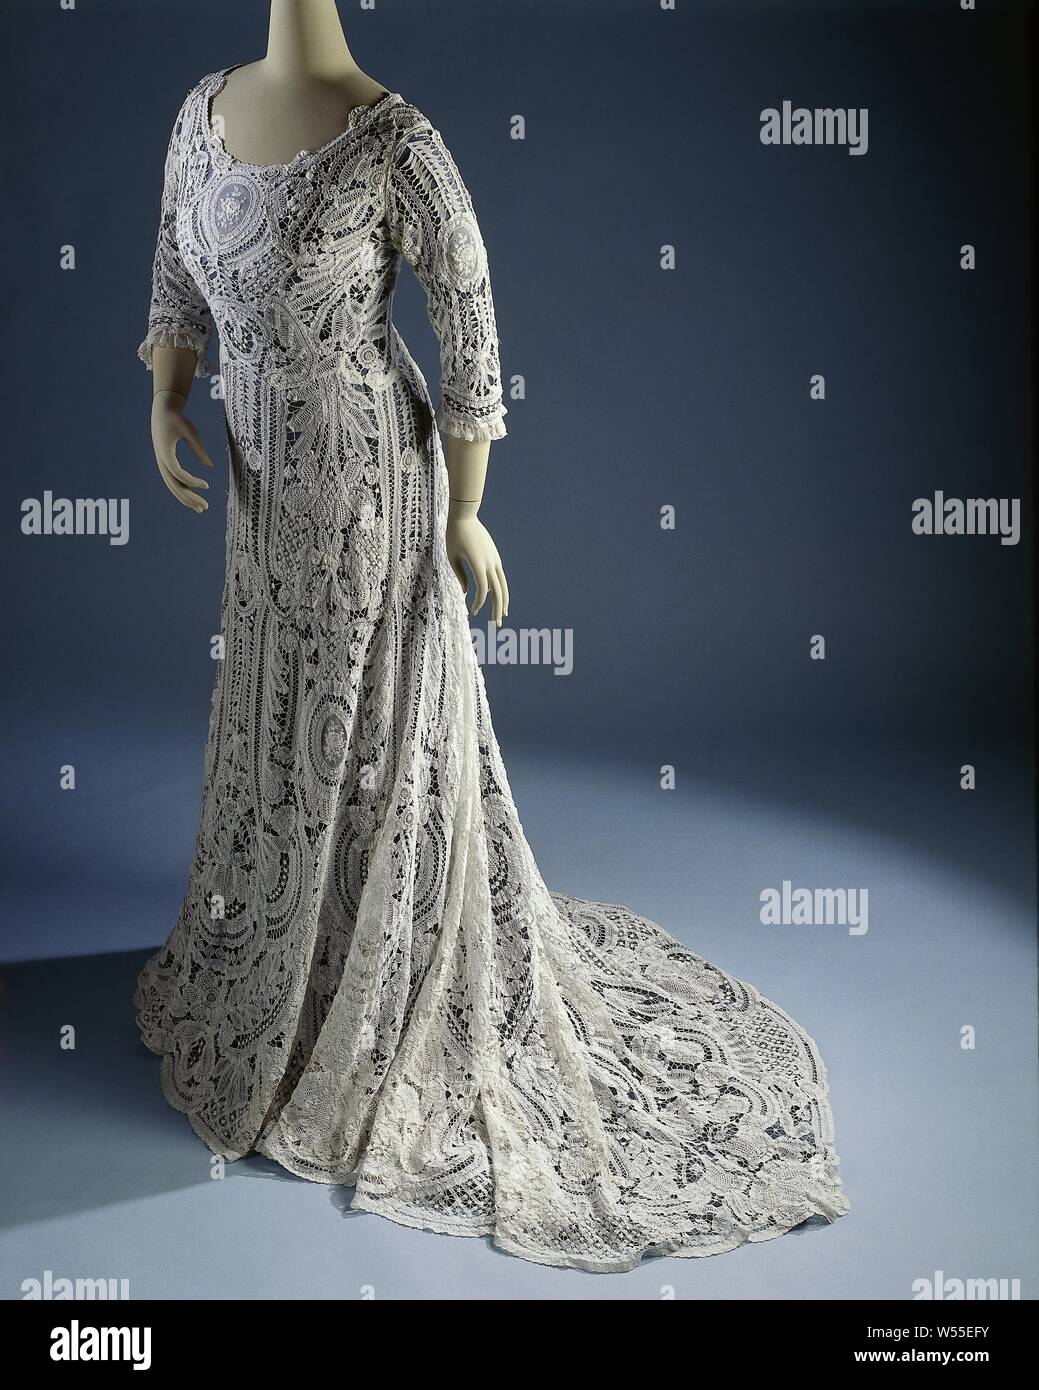 Dress with half-long sleeves and train, from cotton lace with fillings from needle lace, from white cotton lace with fillings from needle lace. The sleeves are trimmed with a strip of machined Valenciennes and with medallions from also machined lace. Design: large flowers and leaves and C-volutes, in the medallions roses. Lining of white (art?) Silk (modern)., Foliage, tendrils, branches, ornament, flowers, anonymous, Belgium (possibly), c. 1900 - c. 1910, geheel, Valenciennes lace, l 149.0 cm × l 194.0 cm Stock Photo